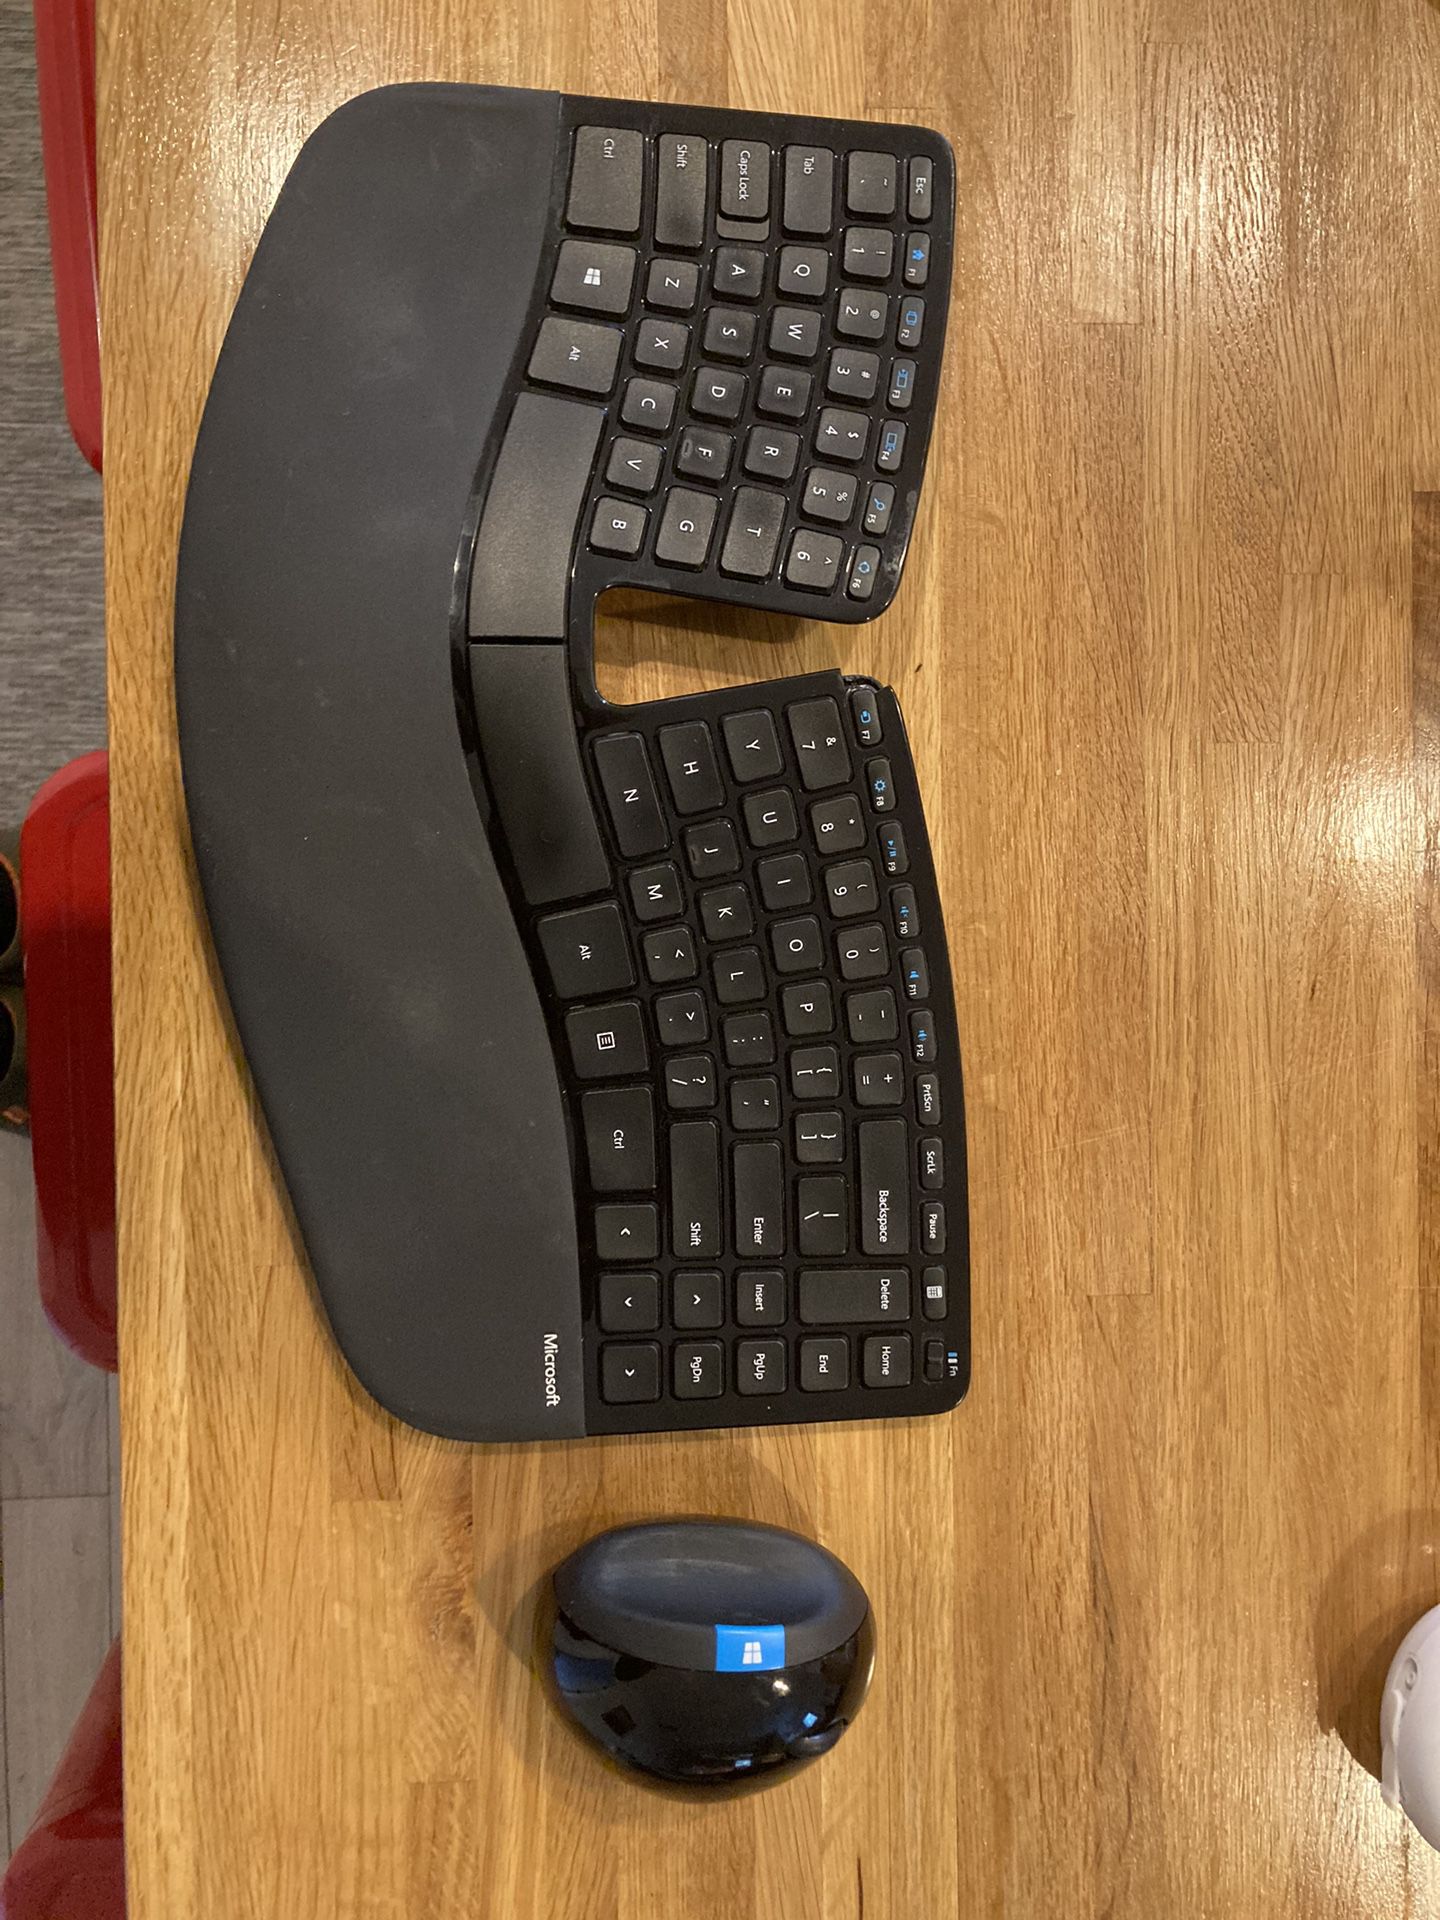 Sculpt Keyboard and Mouse